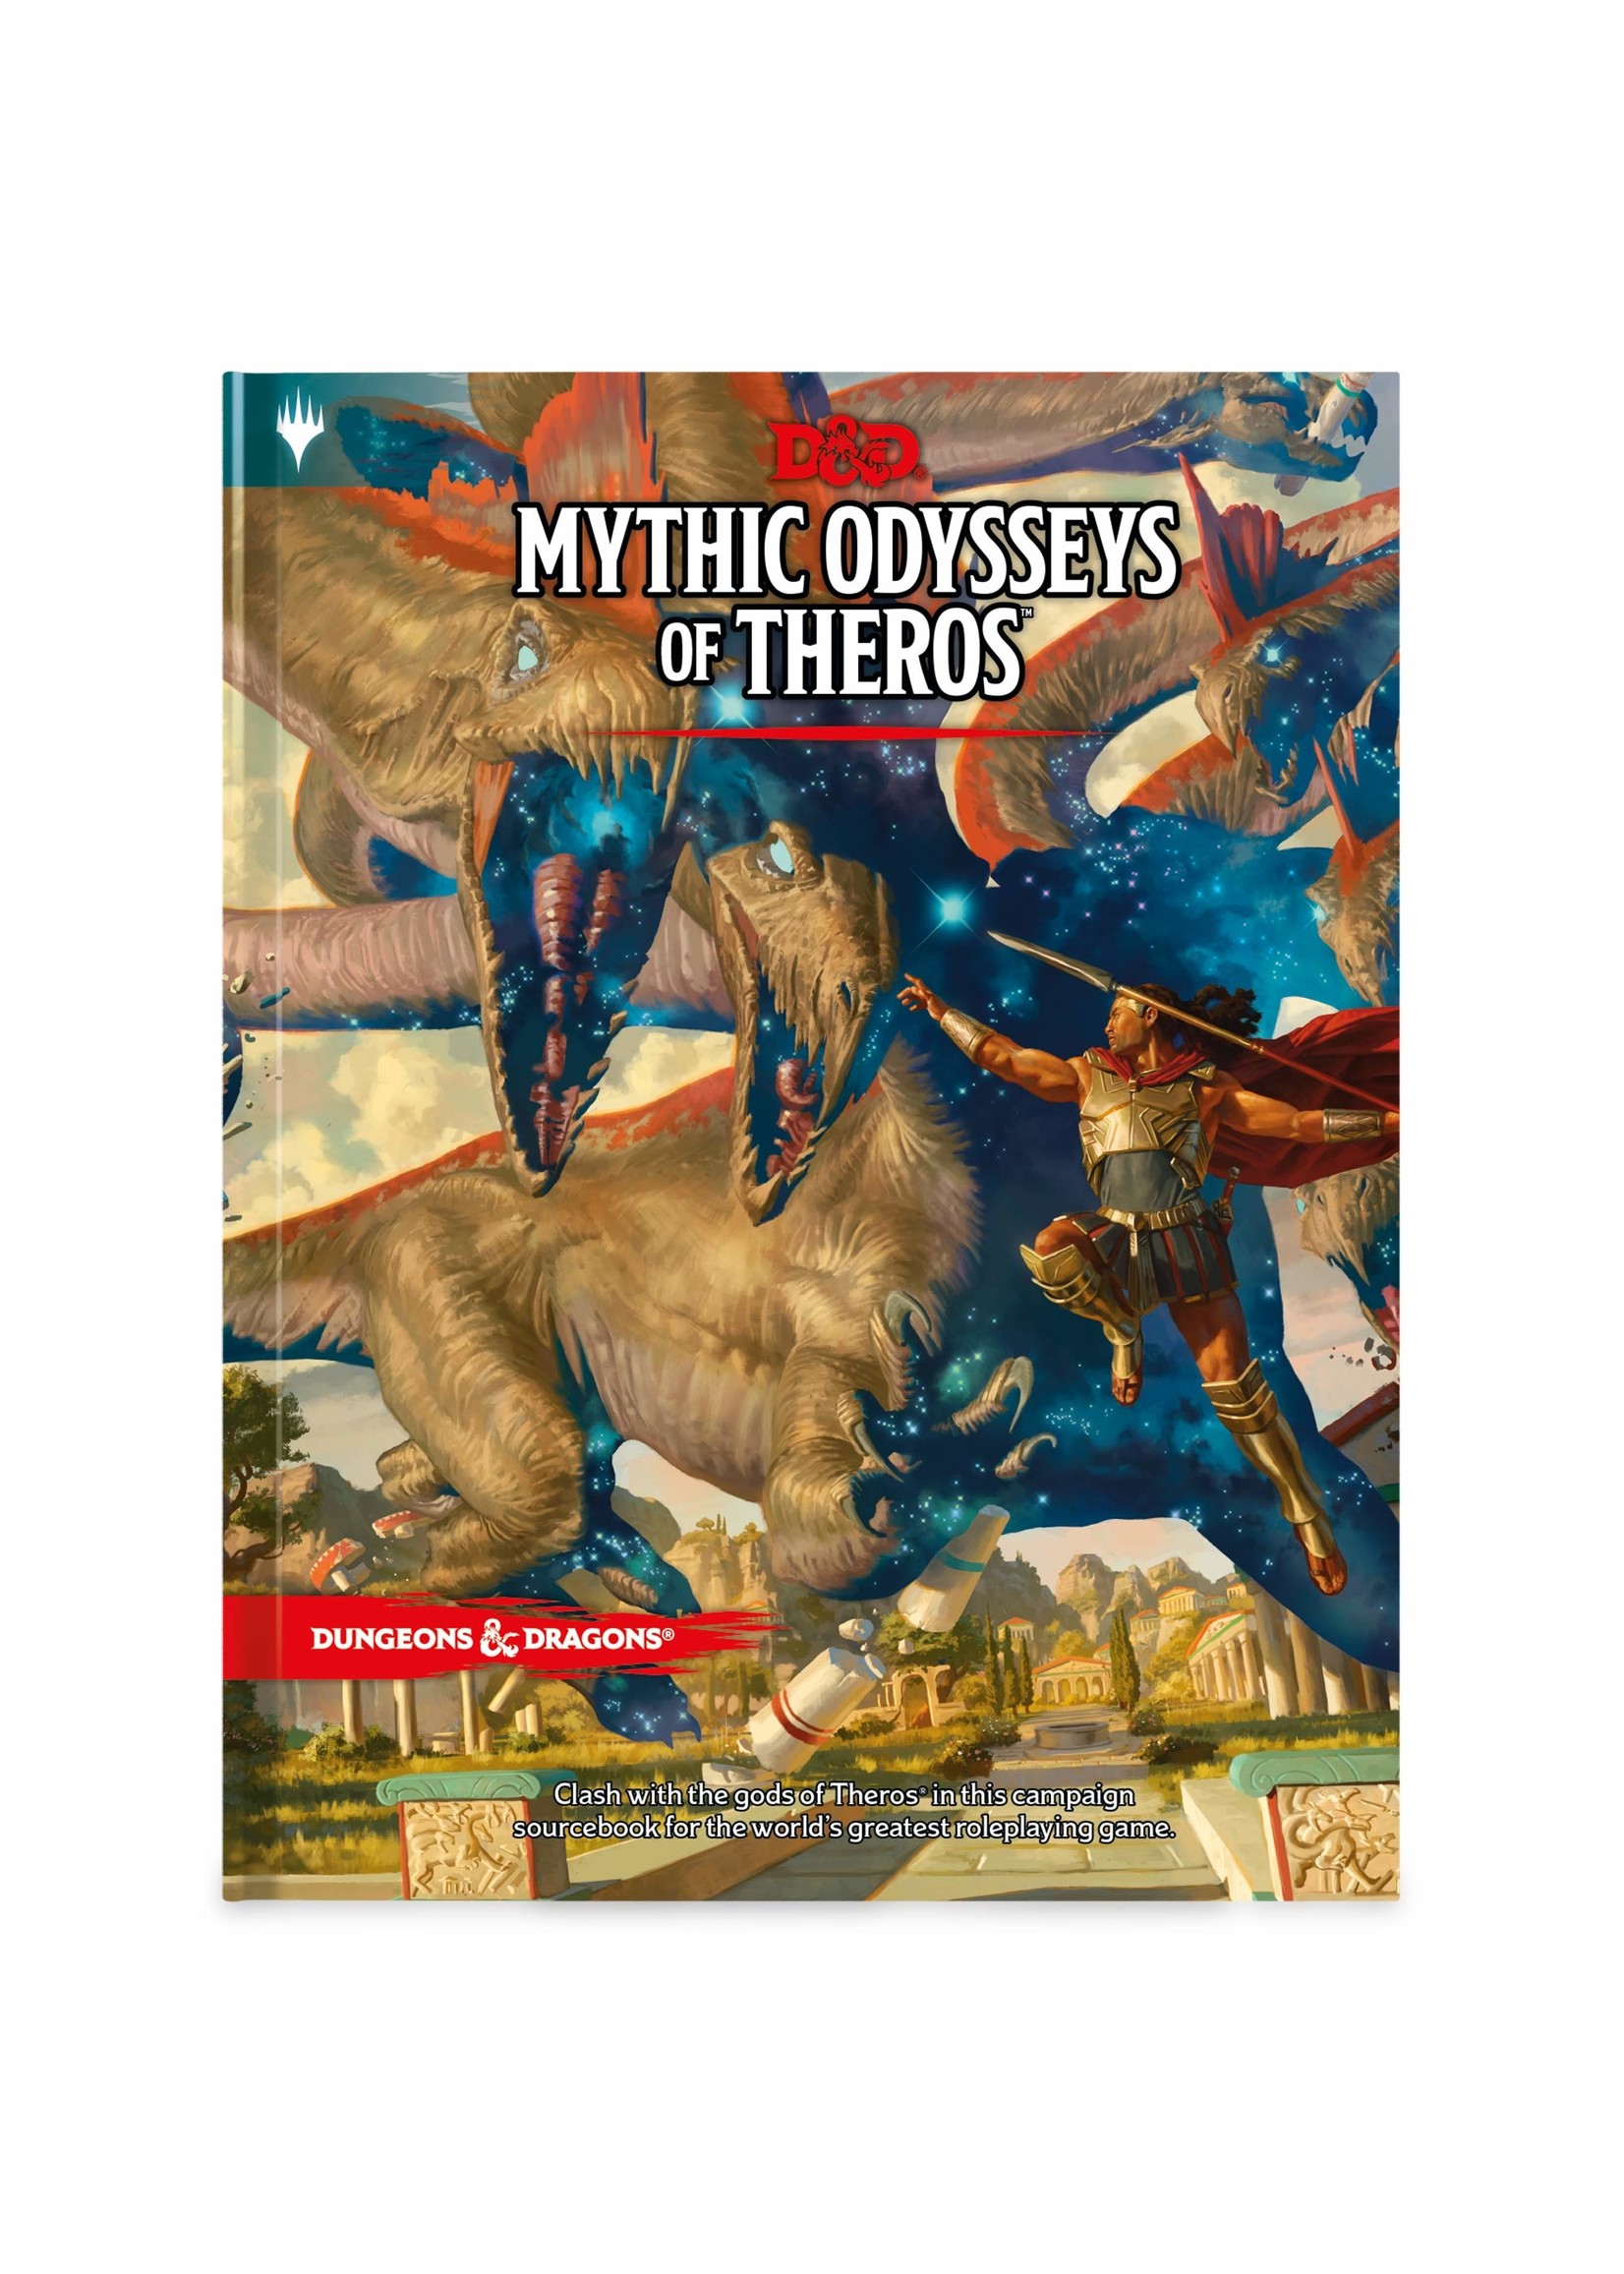 Dungeons & Dragons 5e D&D 5th Edition: Mythic Odysseys of Theros (Hardcover)